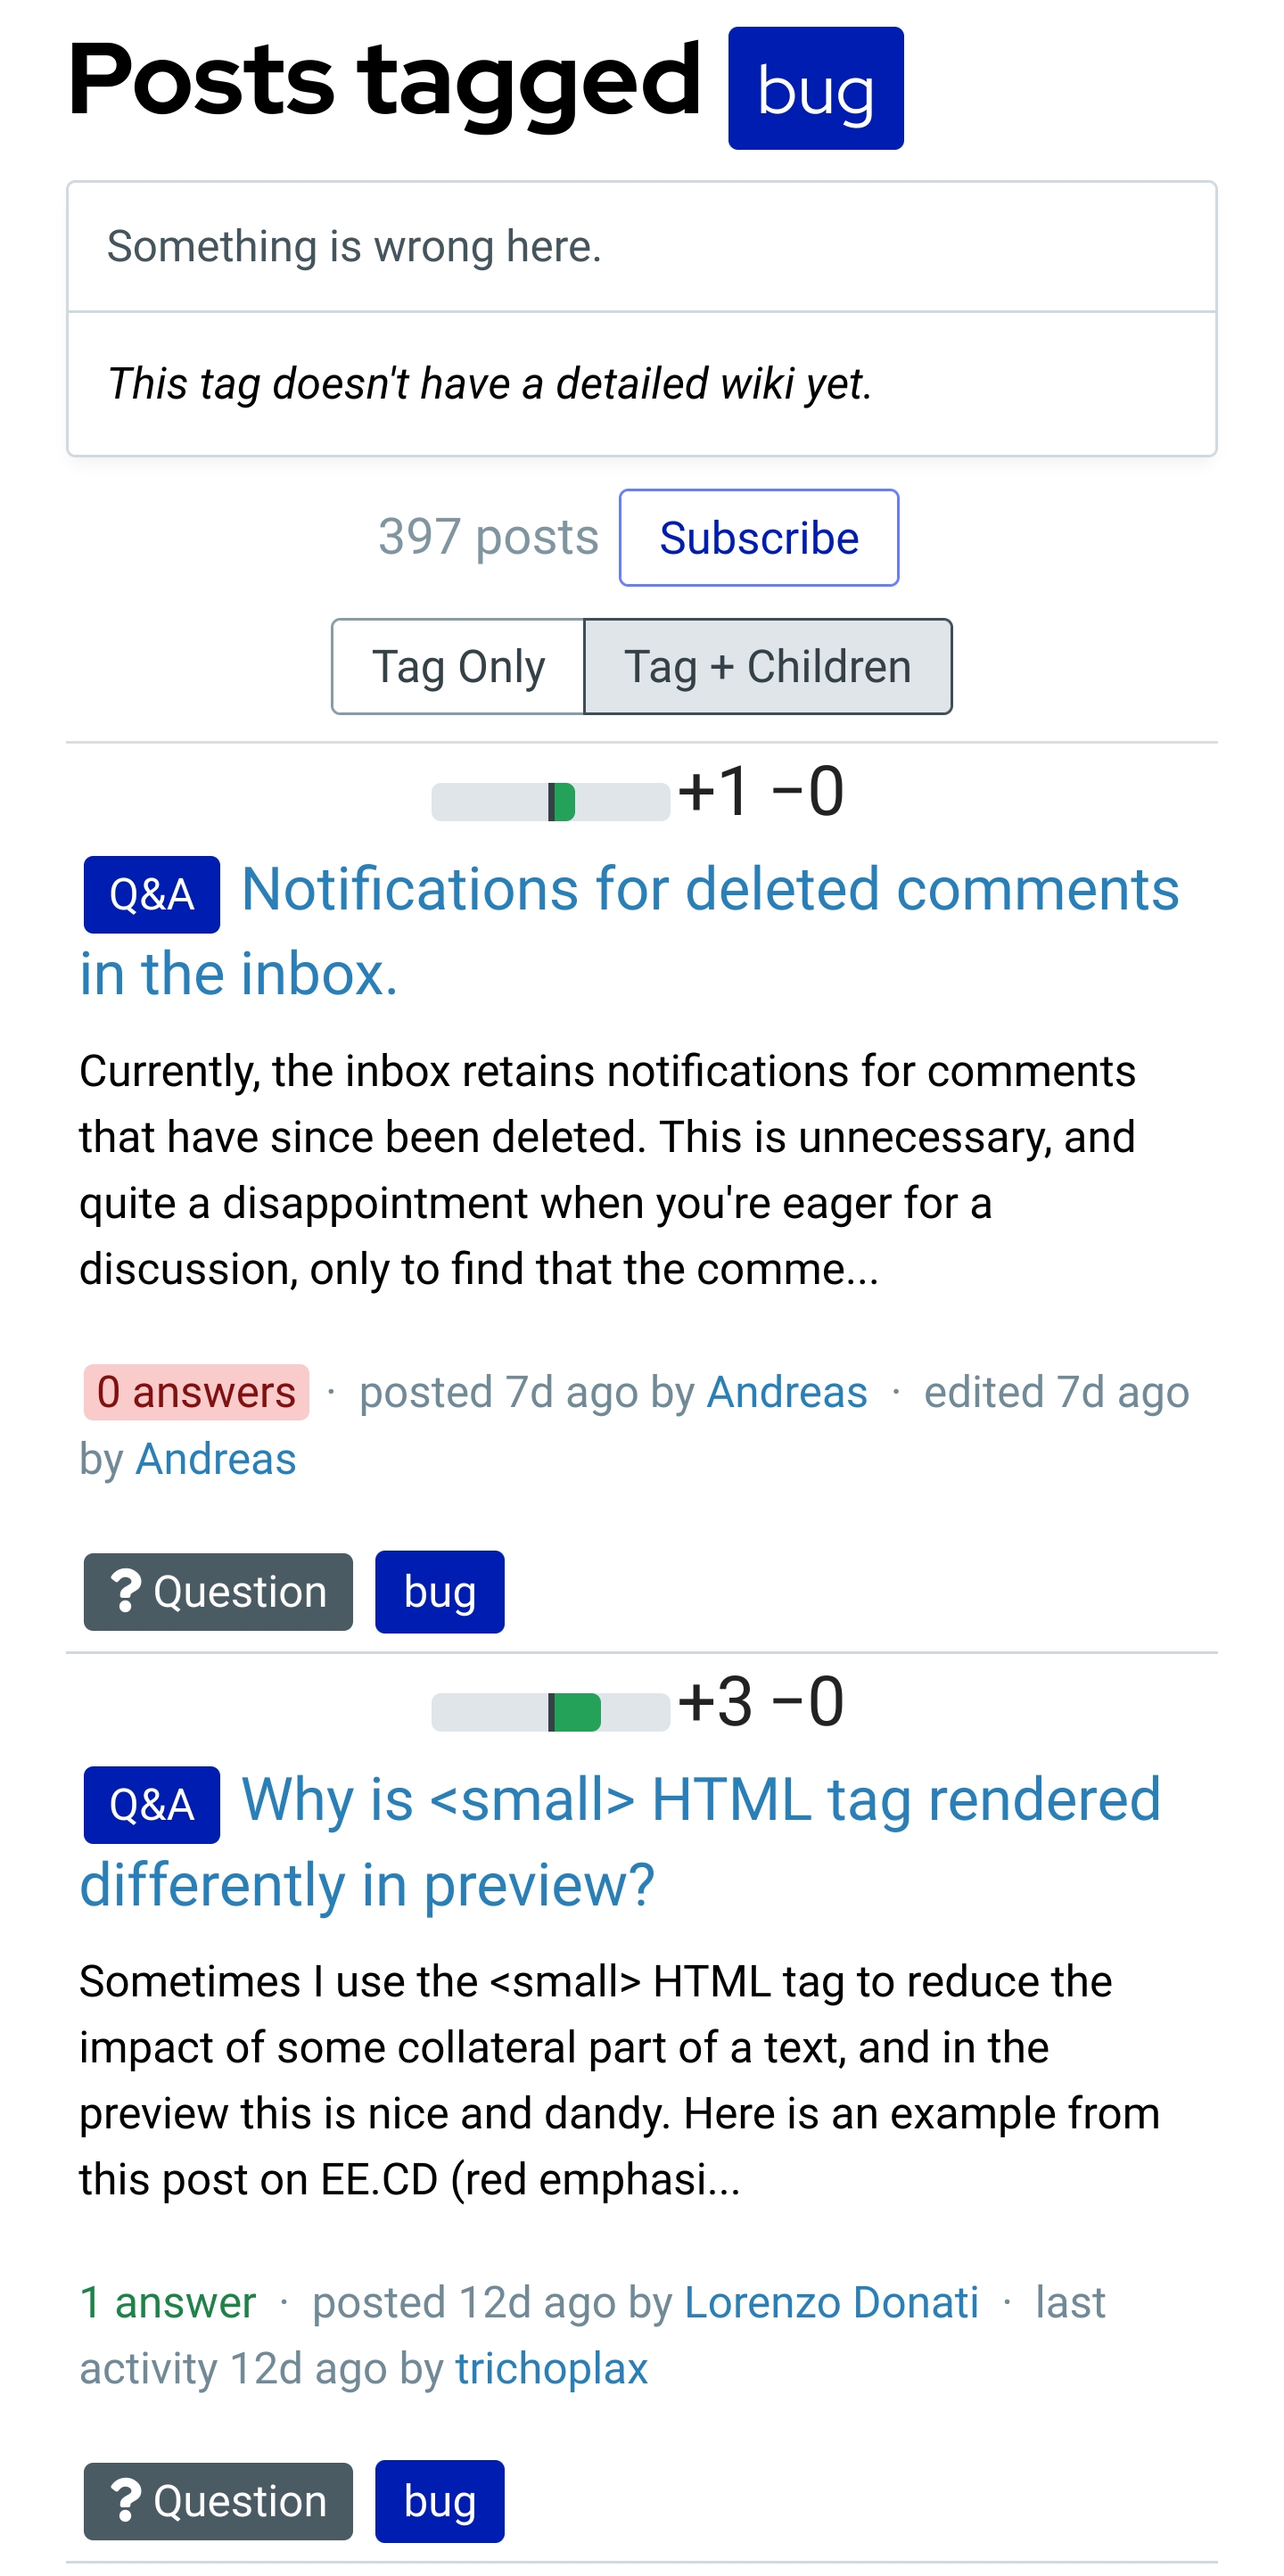 Posts tagged bug, each showing only the bug tag